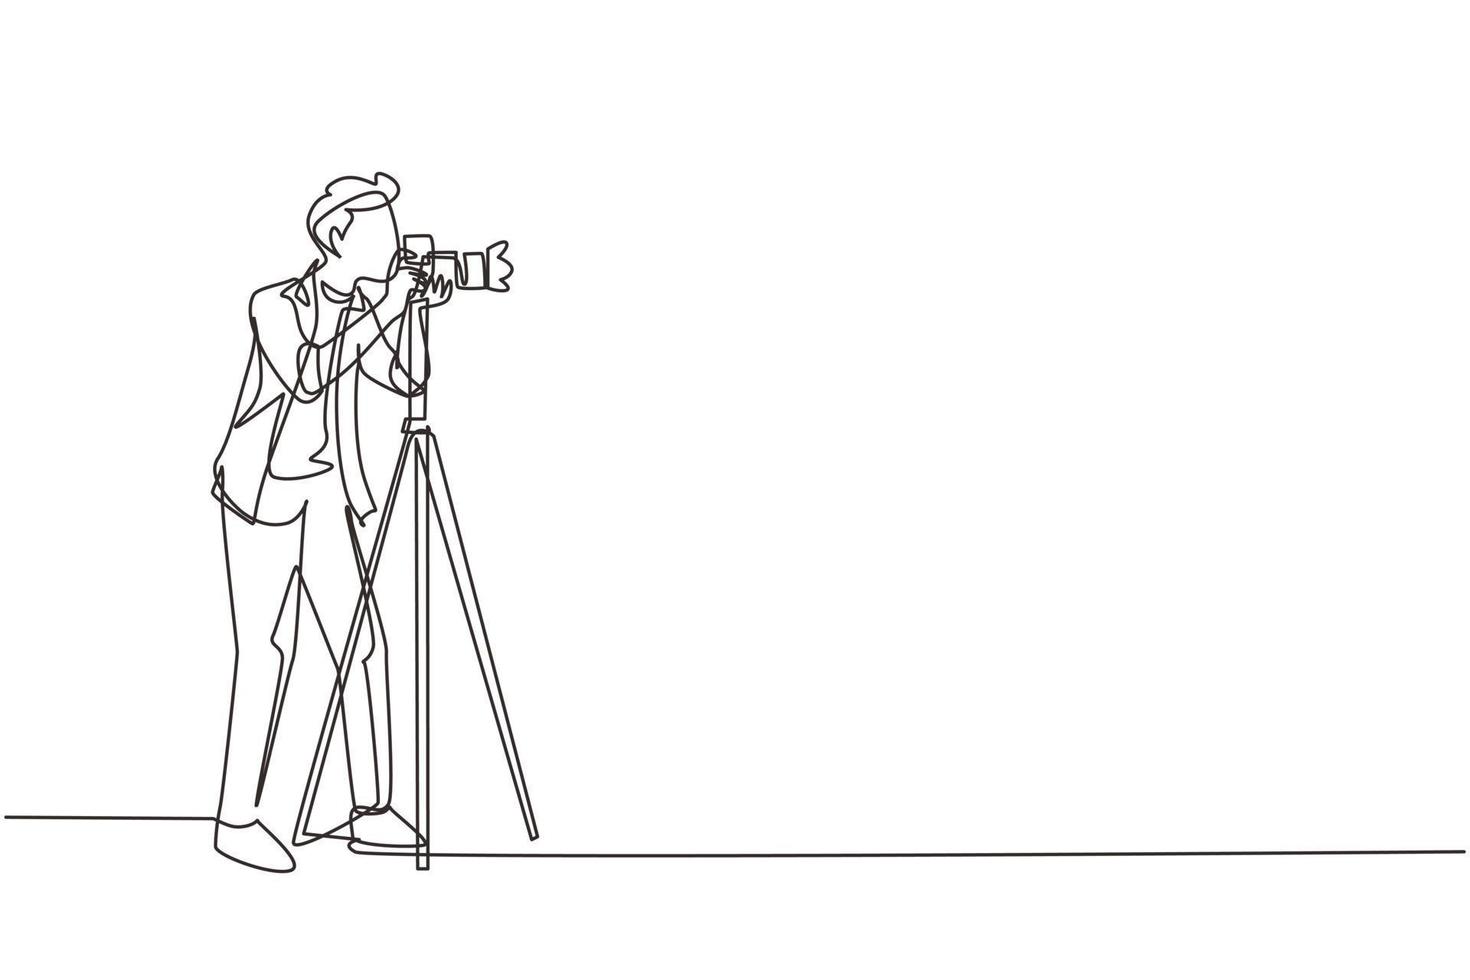 Single continuous line drawing professional photographer with camera pose, male take photo shots, paparazzi, journalist occupation, digital photography hobby. One line draw design vector illustration